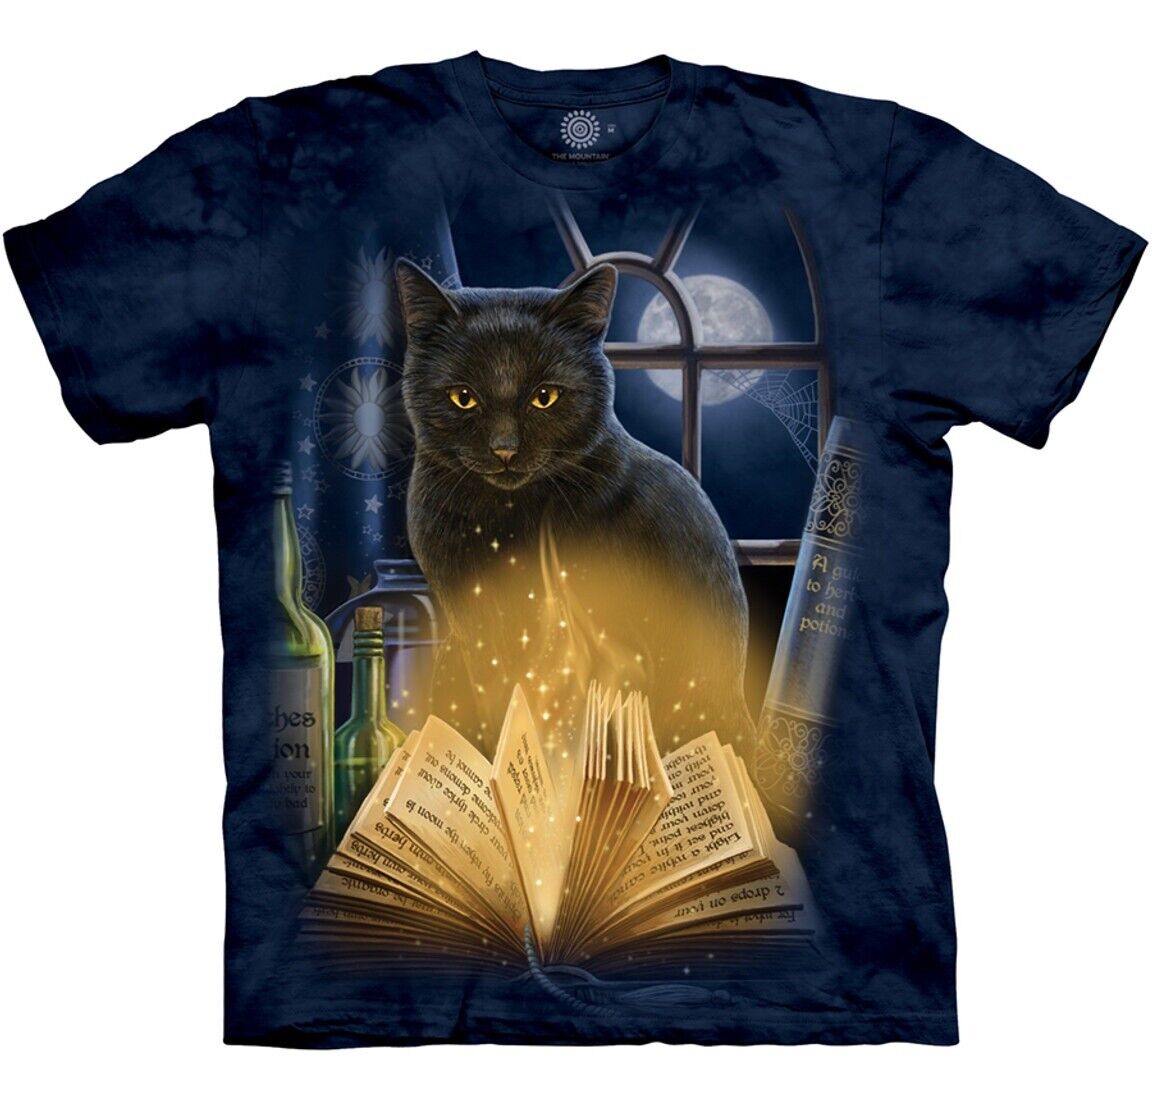 Black Cat Kittens Kitty Moon Magic Bewitched Witch Cute Mountain T-Shirt S-3X